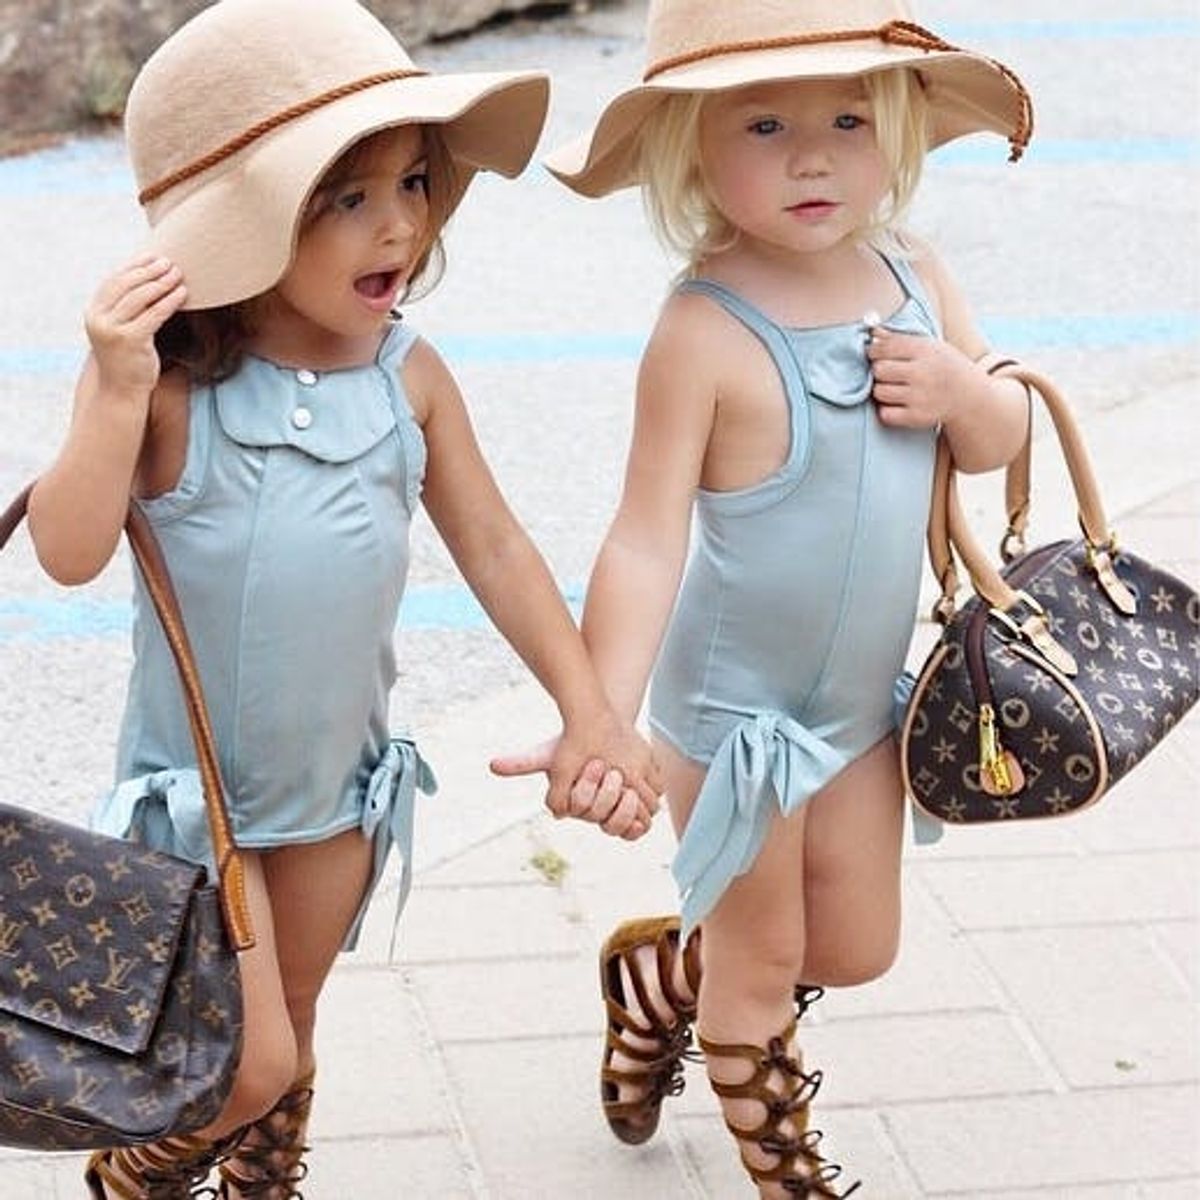 The Newest Instagram Style Stars Are the Cutest Yet